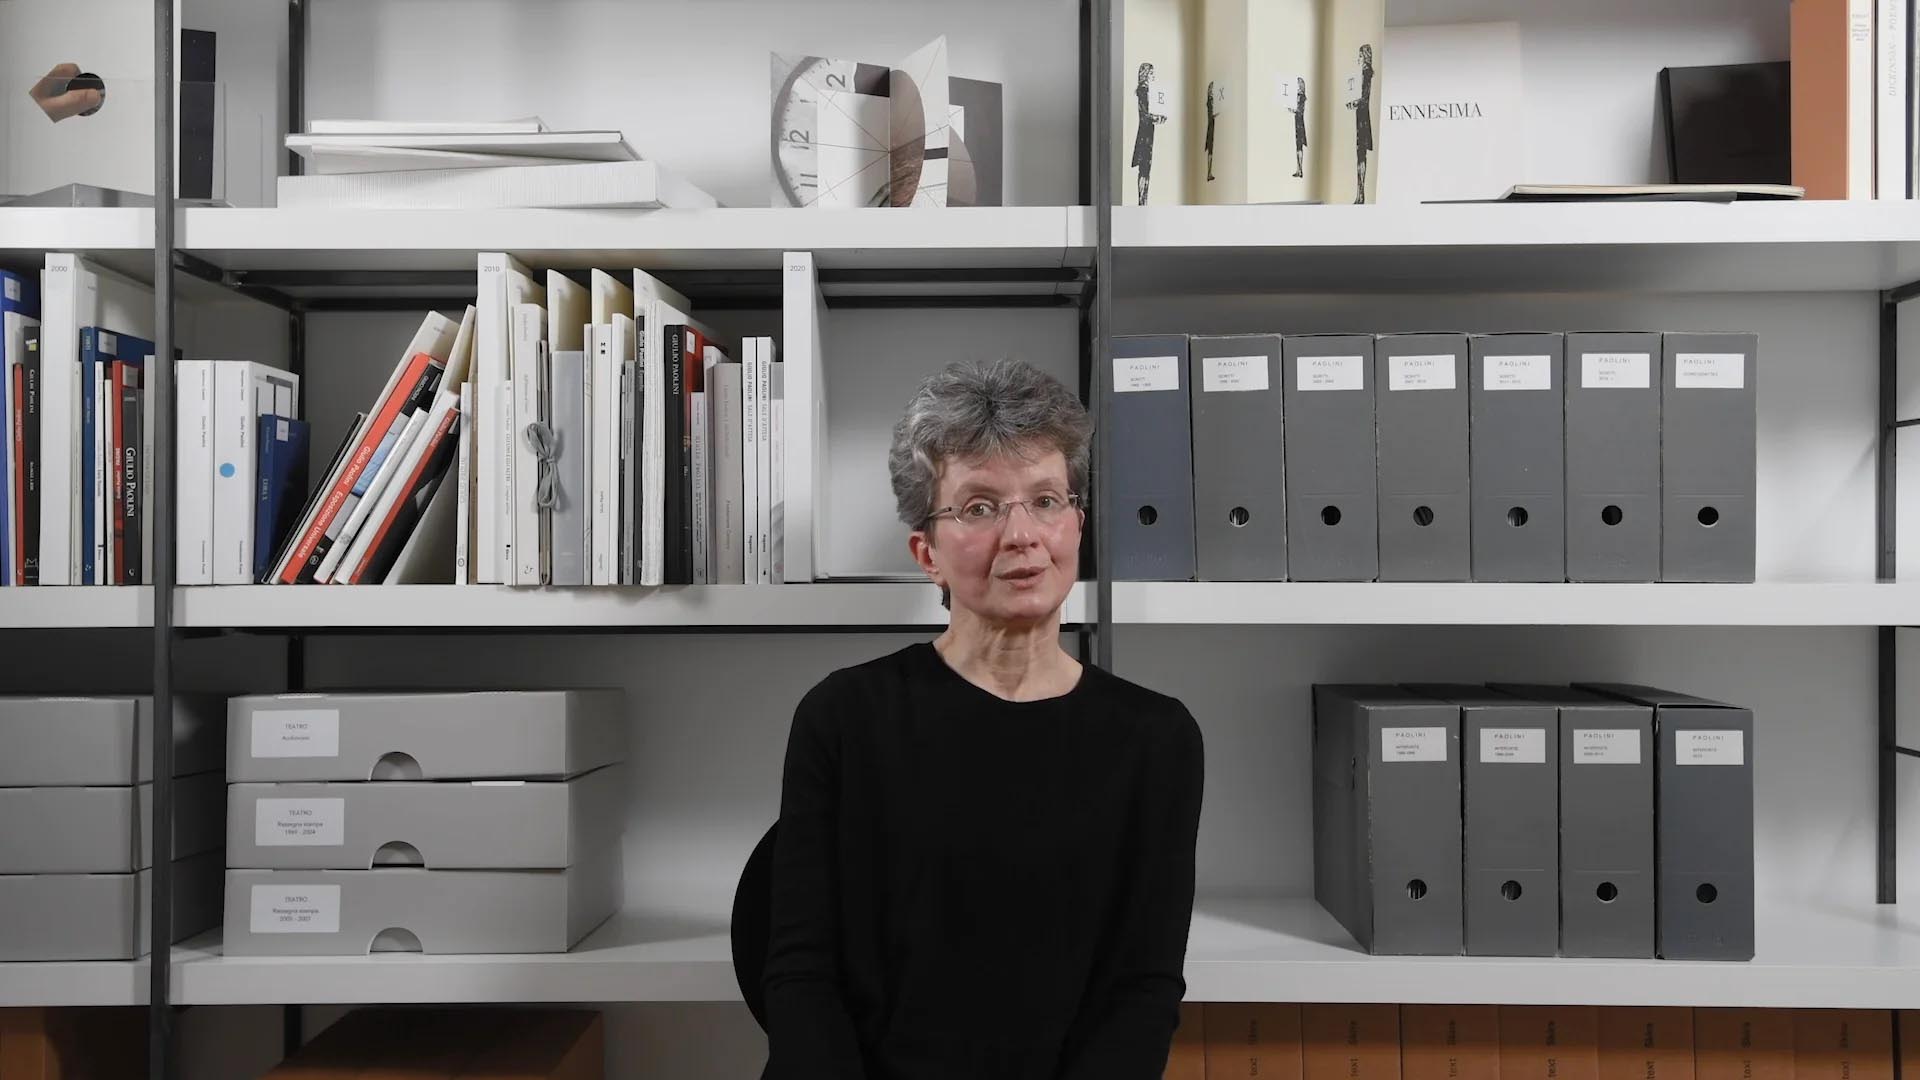 Maddalena Disch presents the archives curated by the Foundation